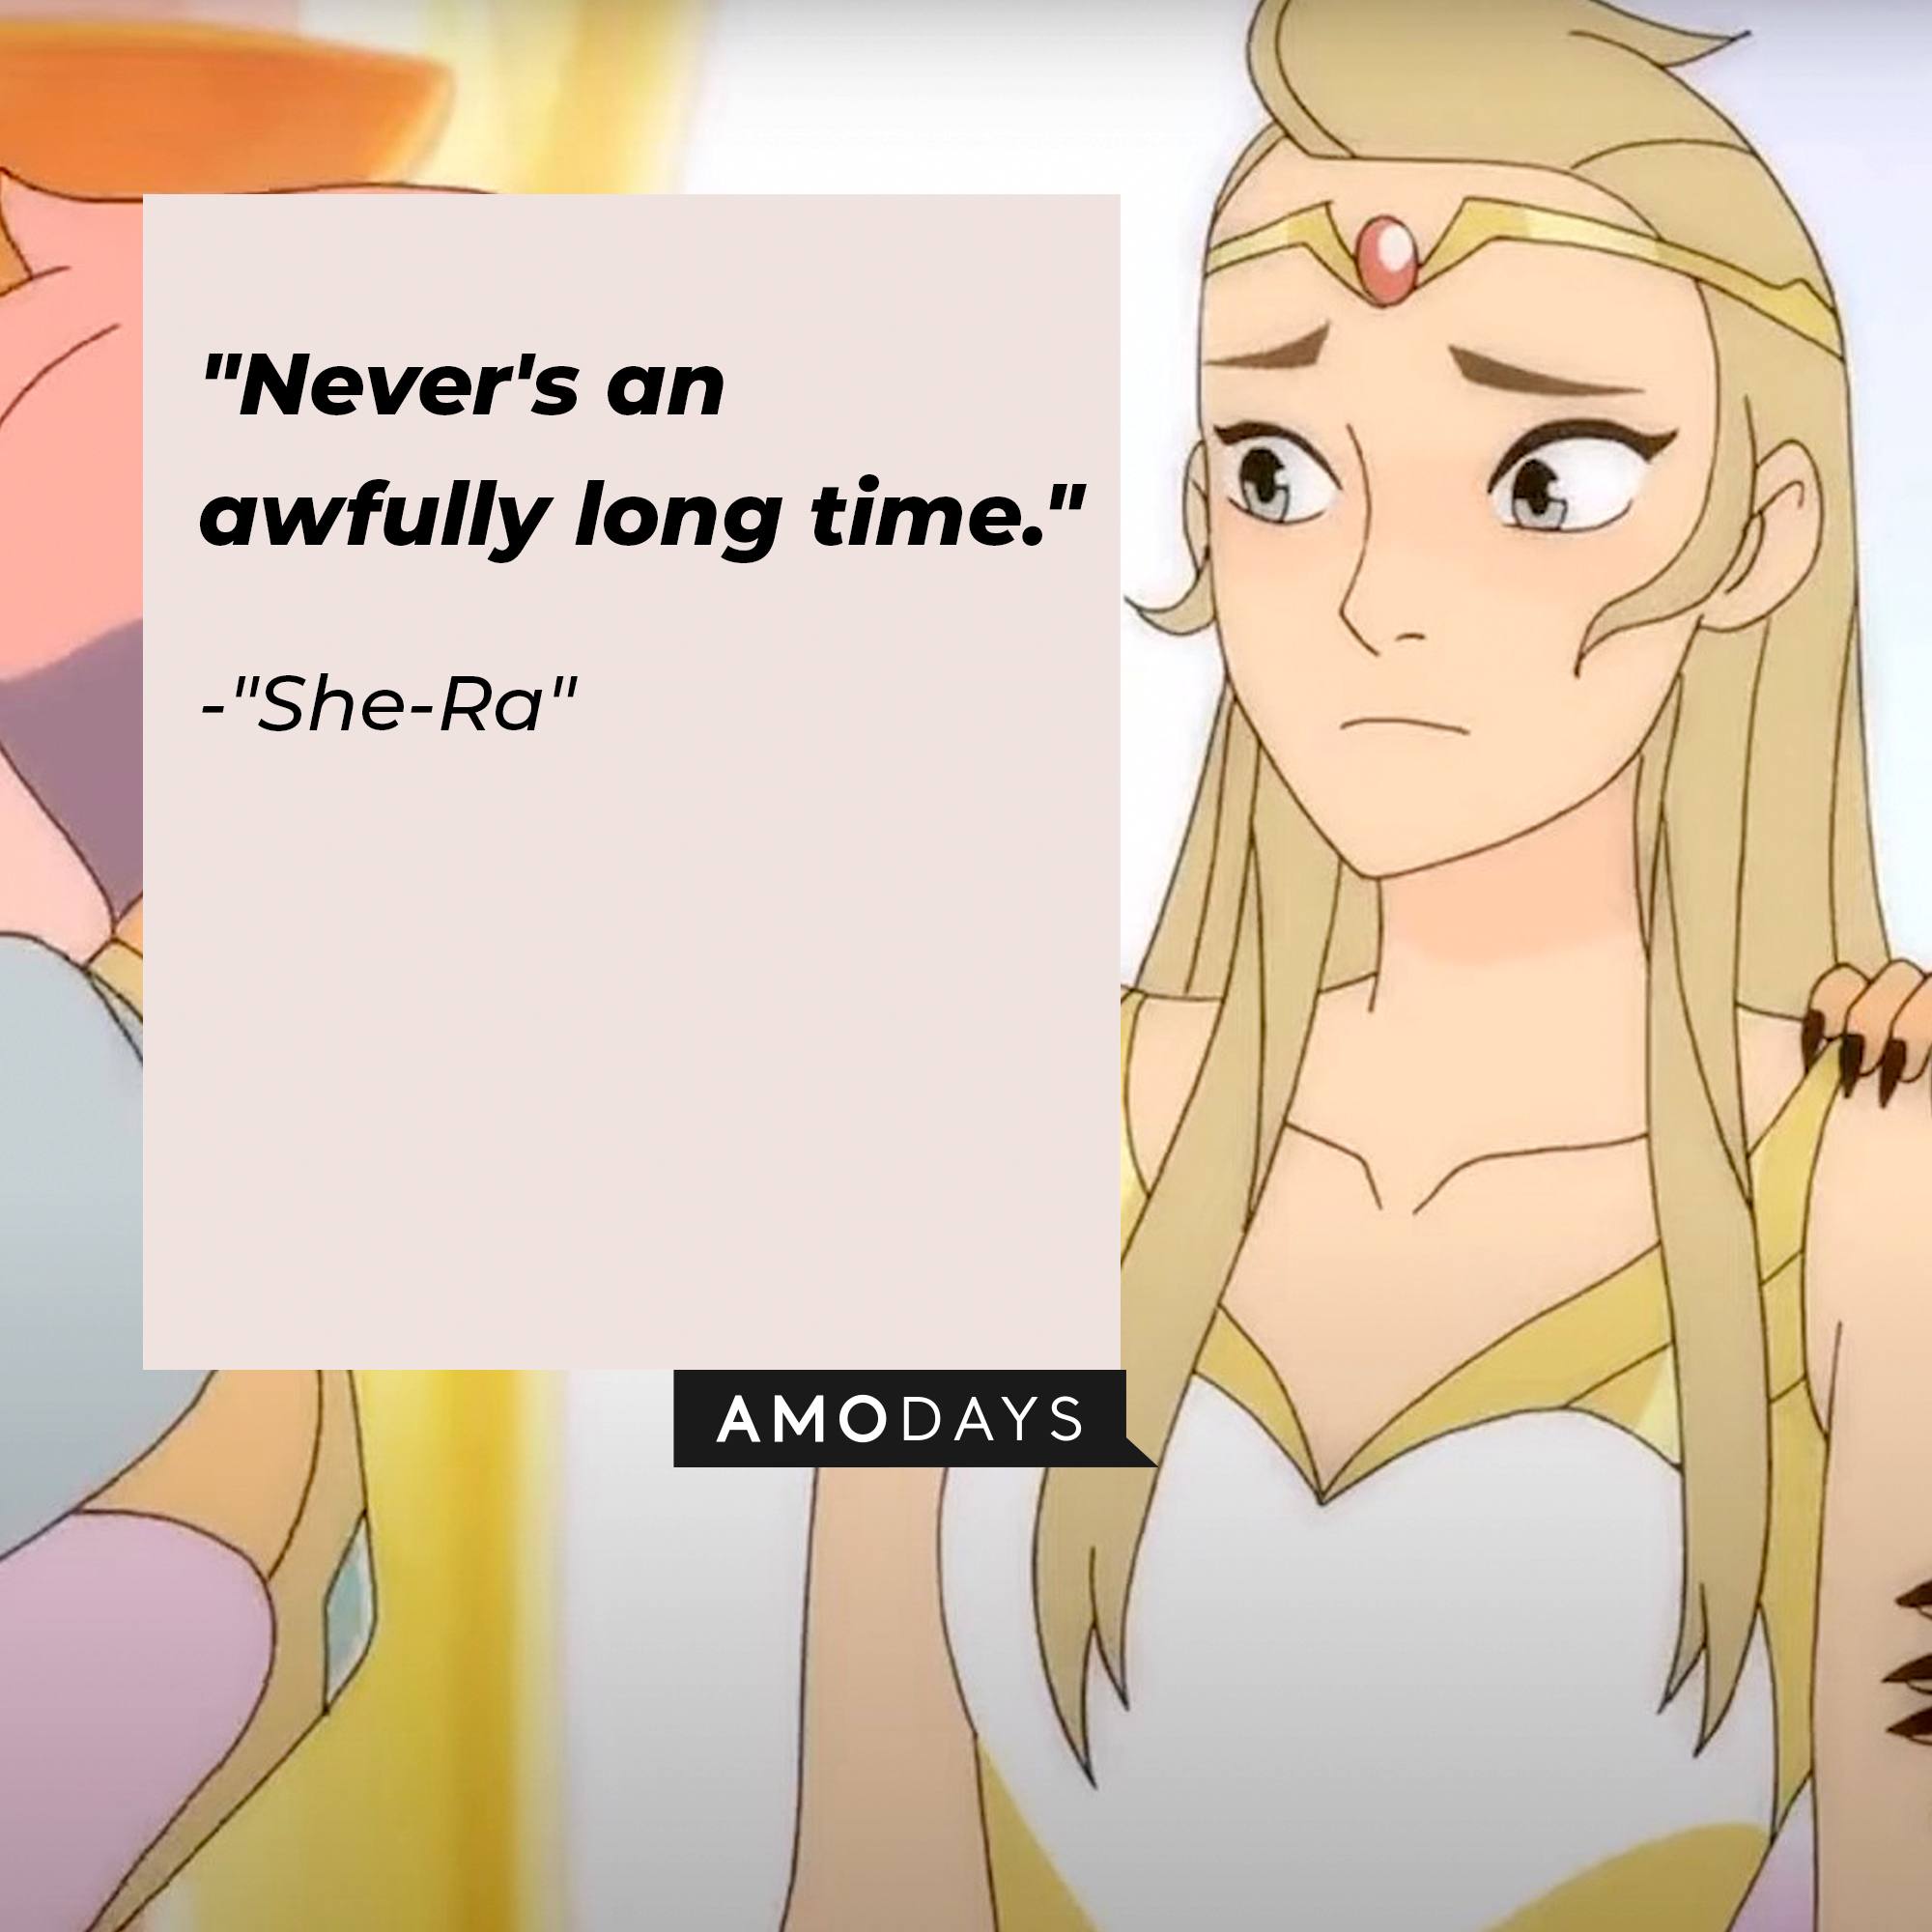 "She-Ra's" quote: "Never's an awfully long time." | Source: Facebook.com/DreamWorksSheRa